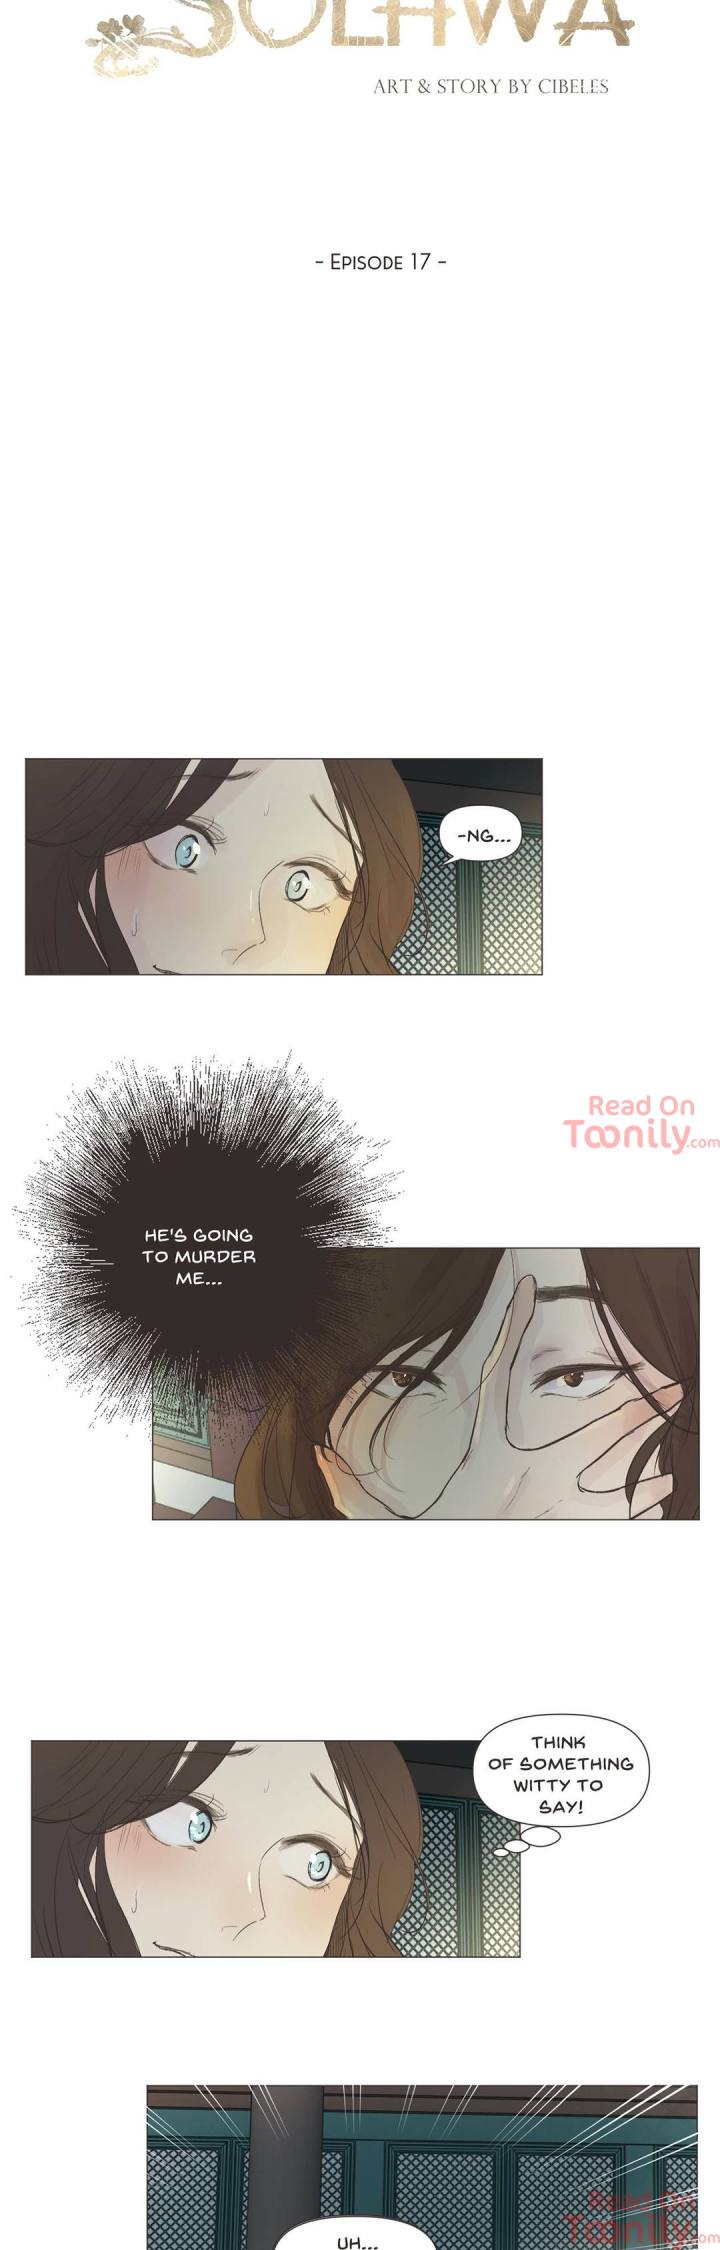 Ellin's Solhwa - Chapter 17 Page 2